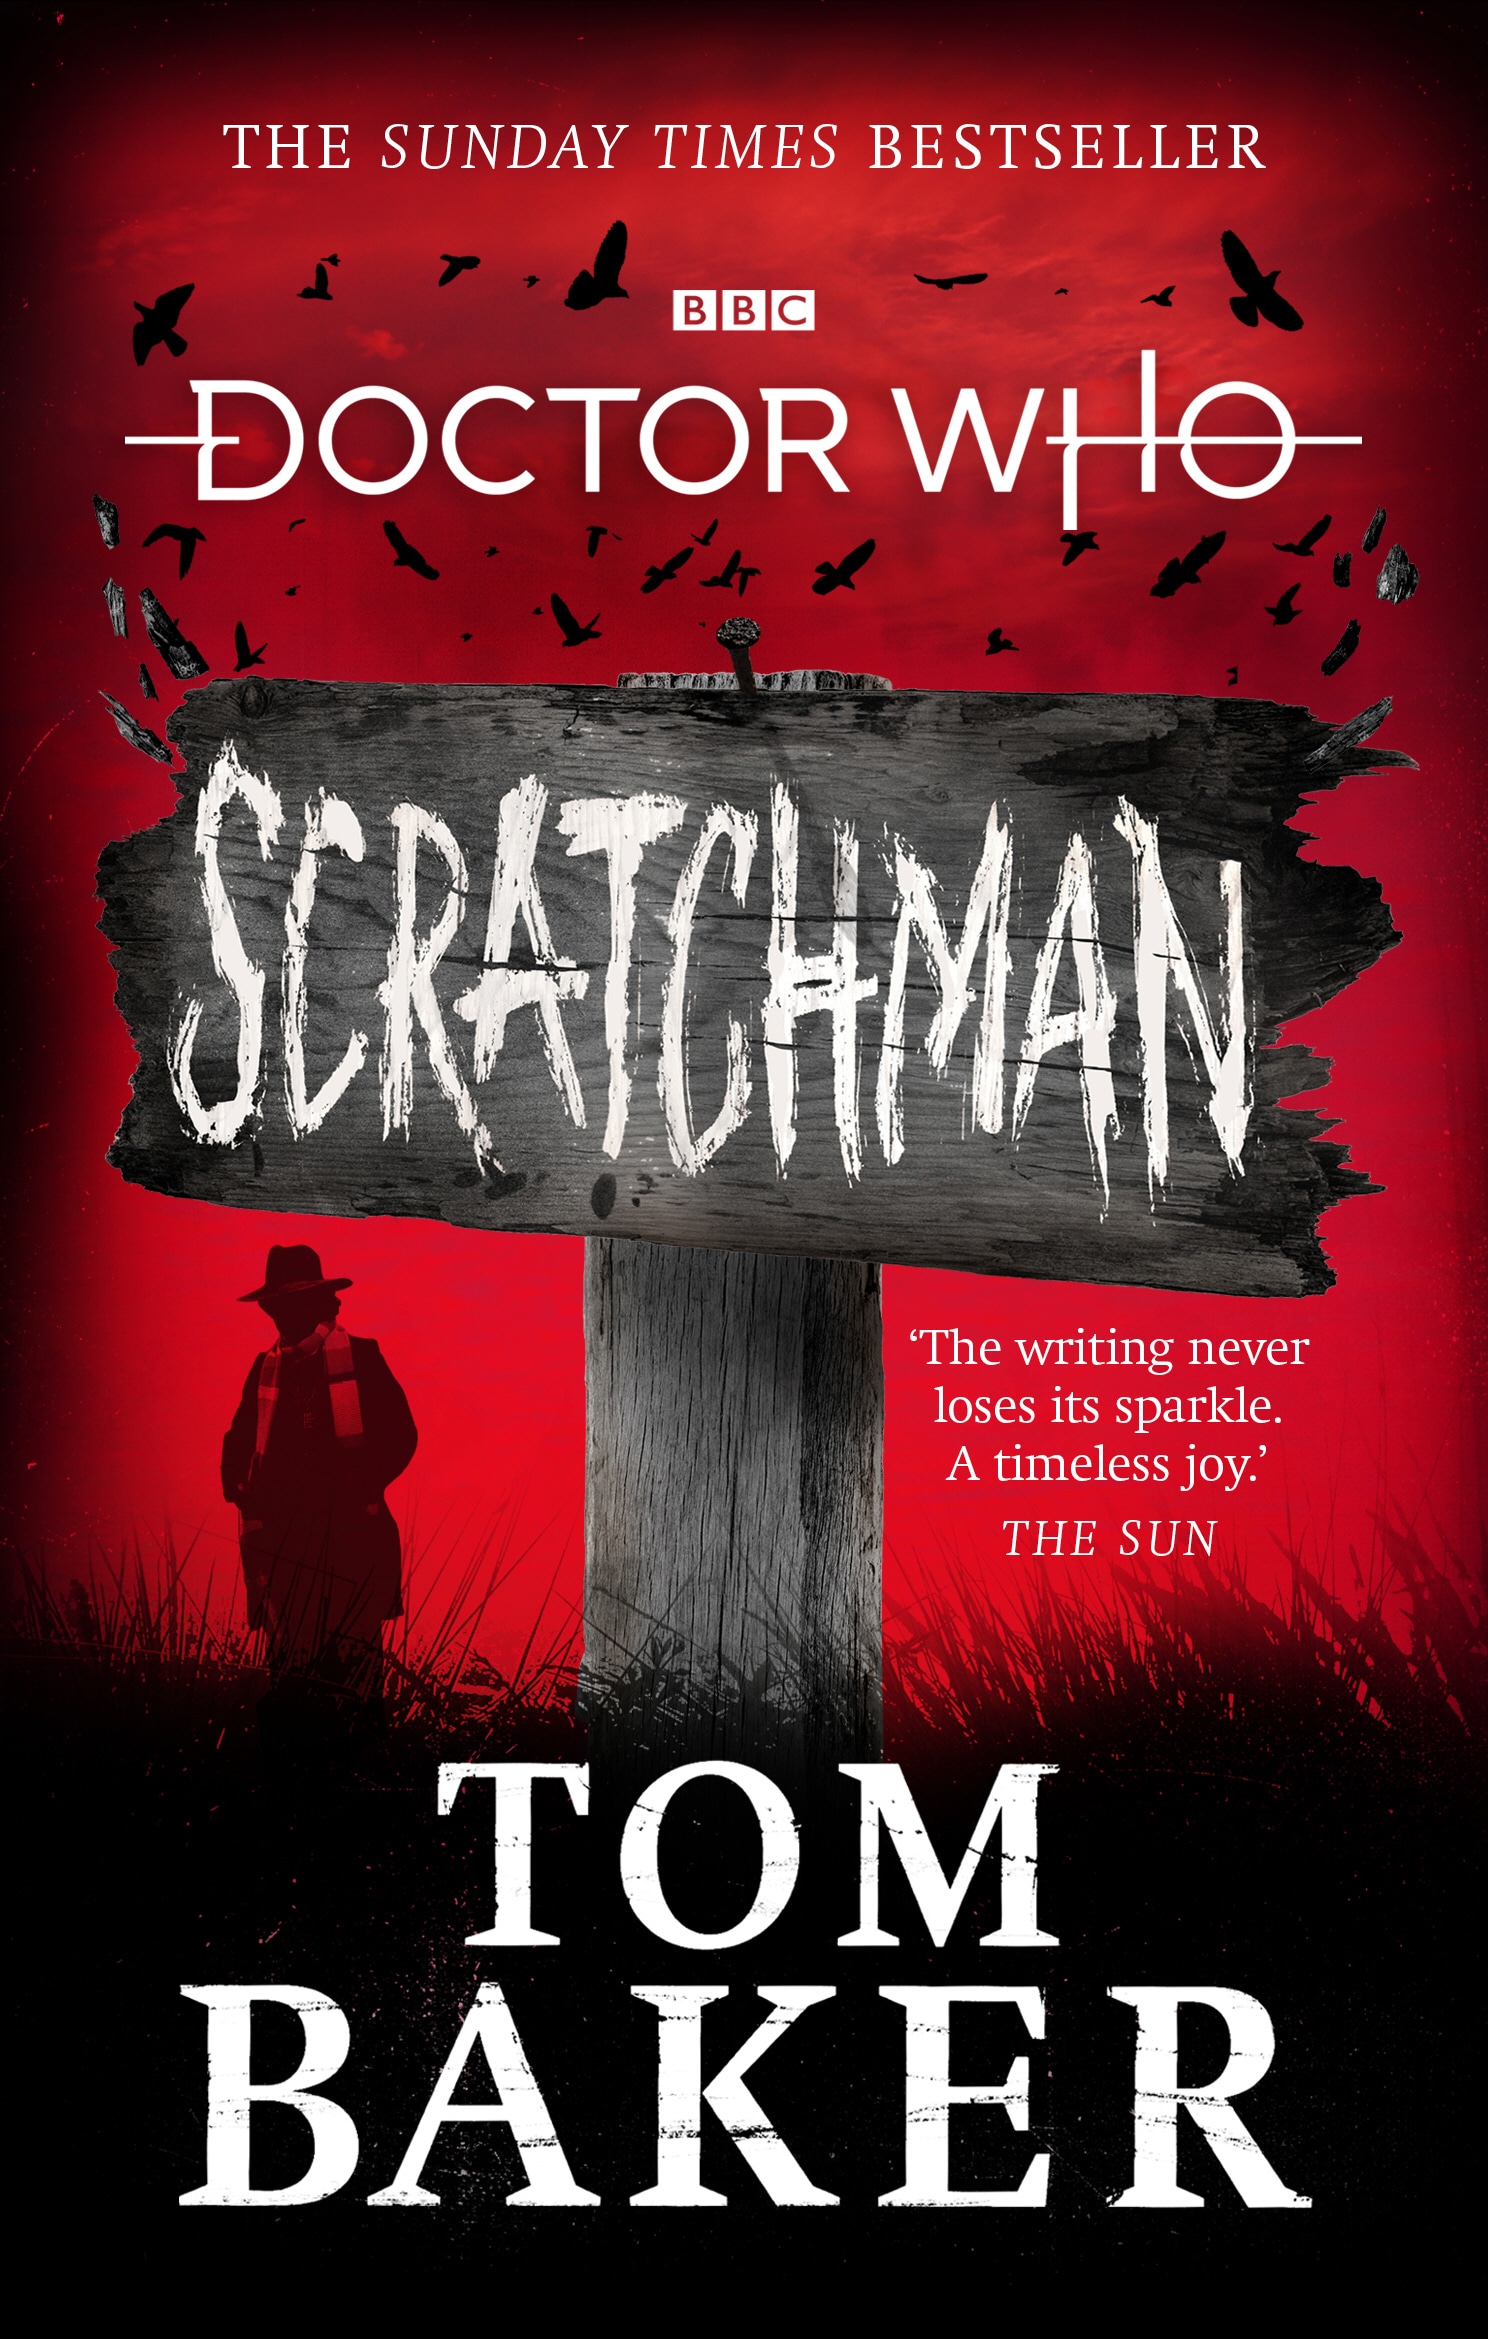 Book “Doctor Who: Scratchman” by Tom Baker, James Goss — April 9, 2020